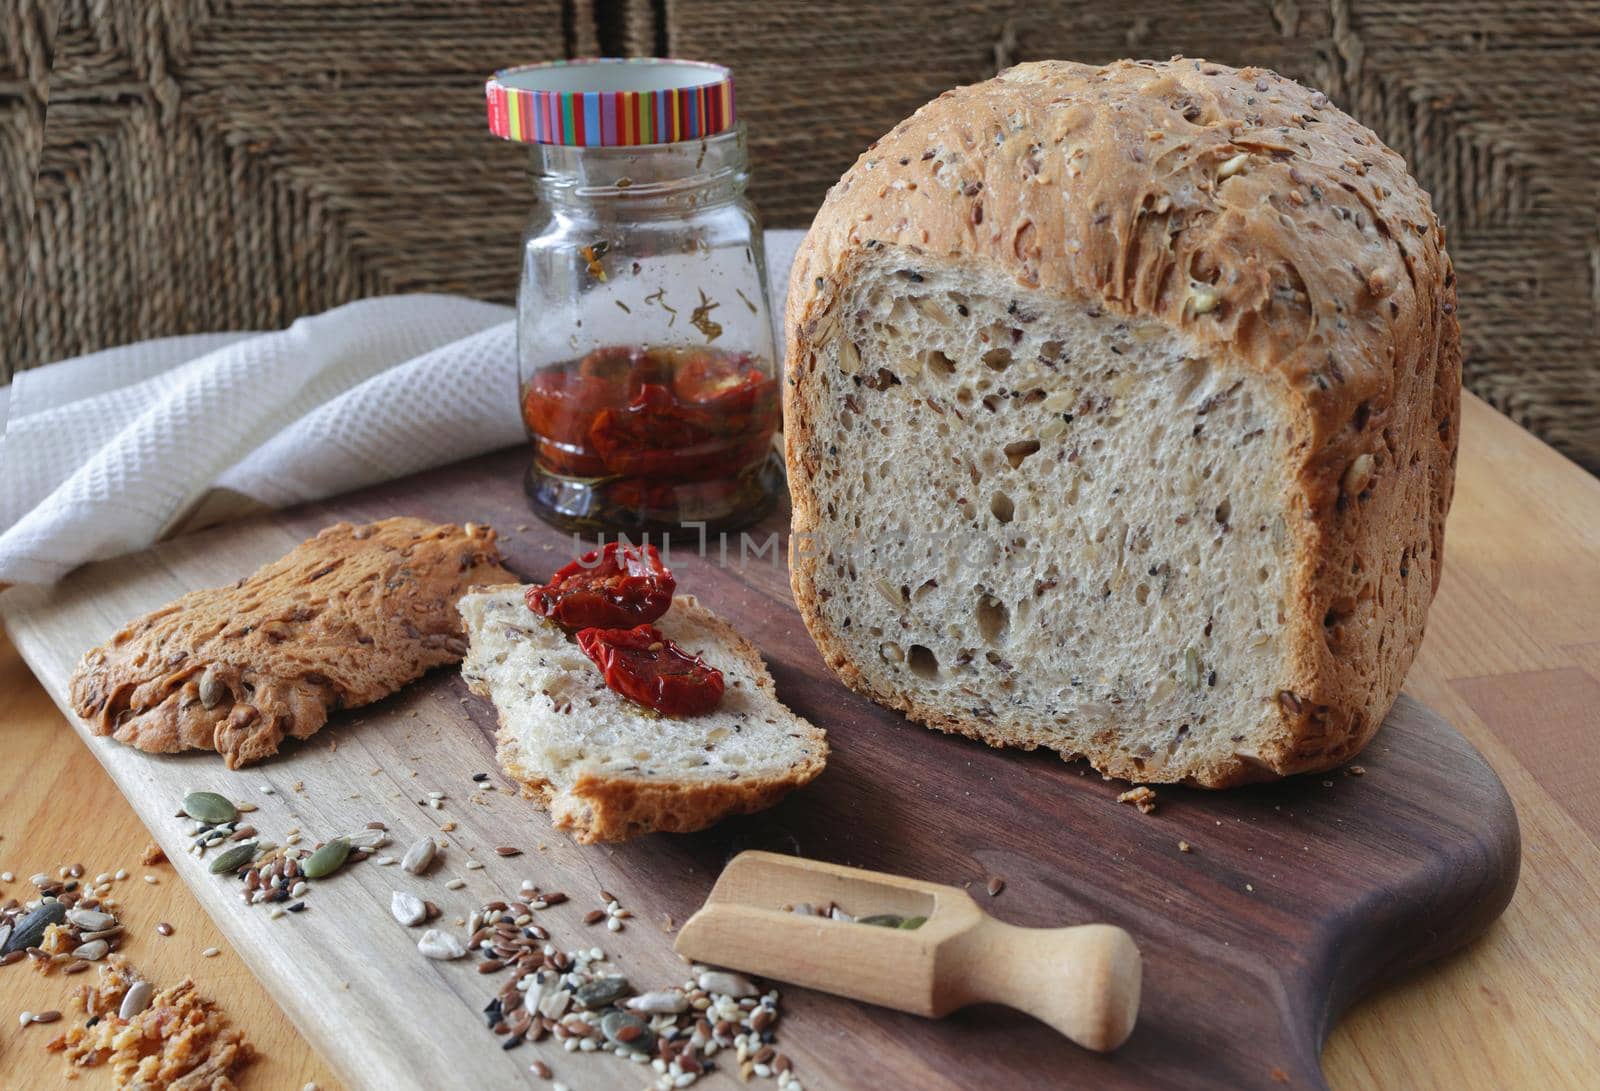 Sliced rye bread on cutting board. Whole grain rye bread with seeds. loaf of homemade whole grain bread and a cut off slice of bread. A mixture of seeds and whole grains. Healthy eating